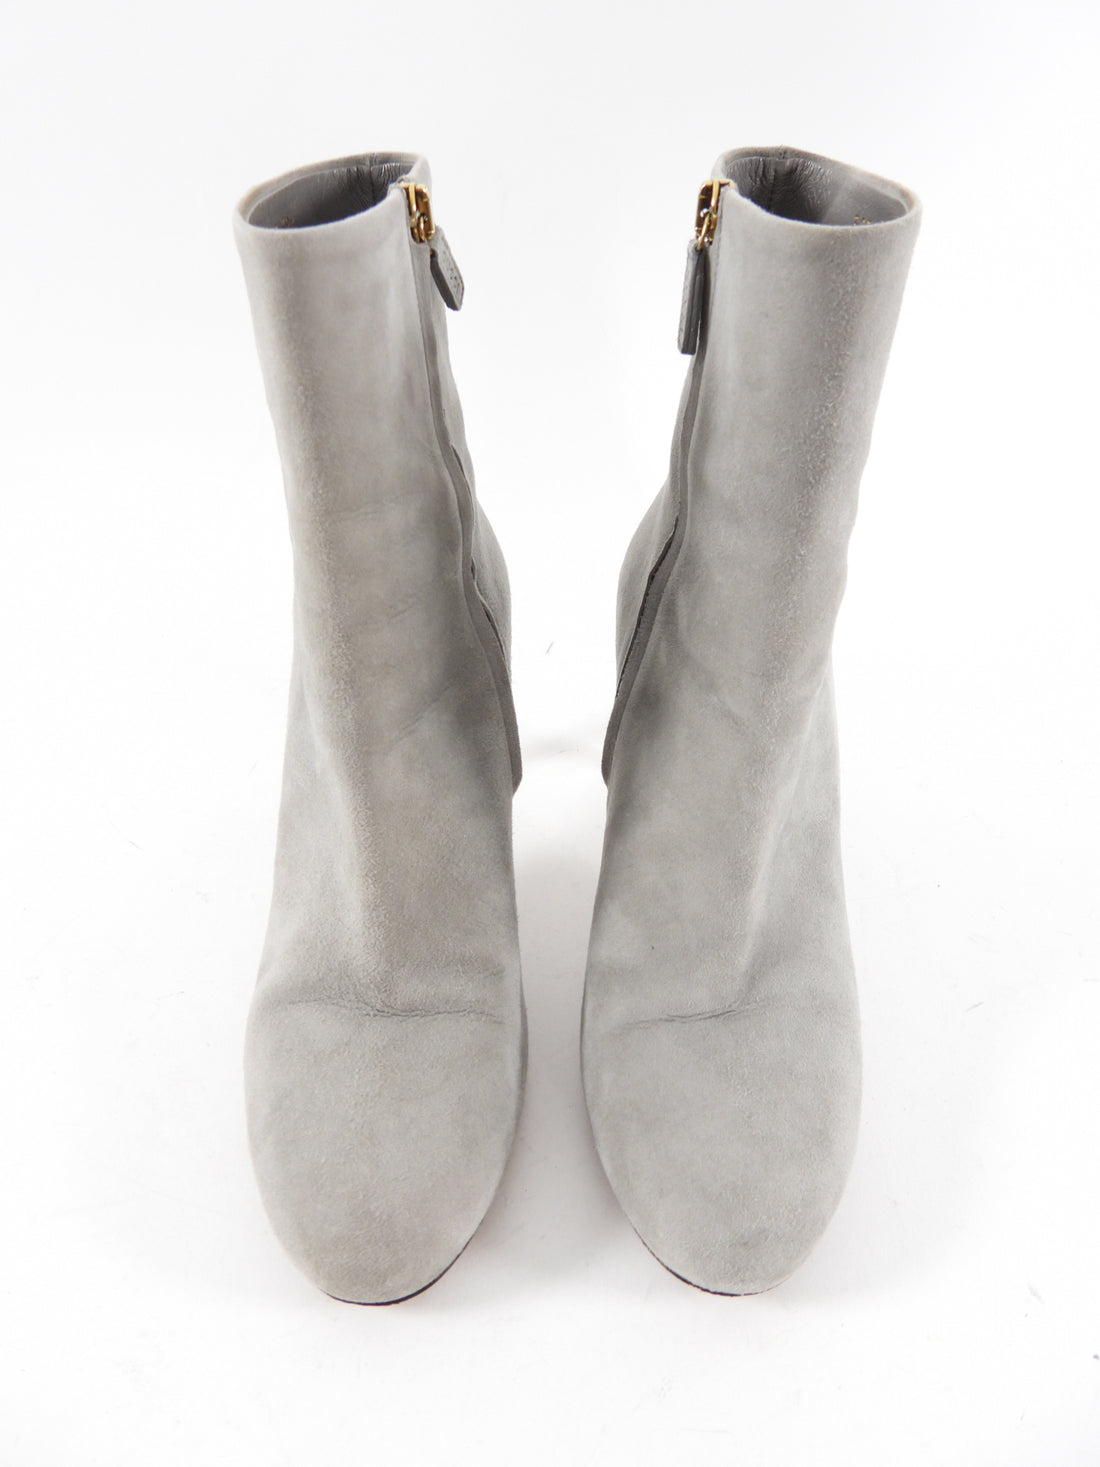 Gucci Light Grey Suede Ankle Boot - 39.5